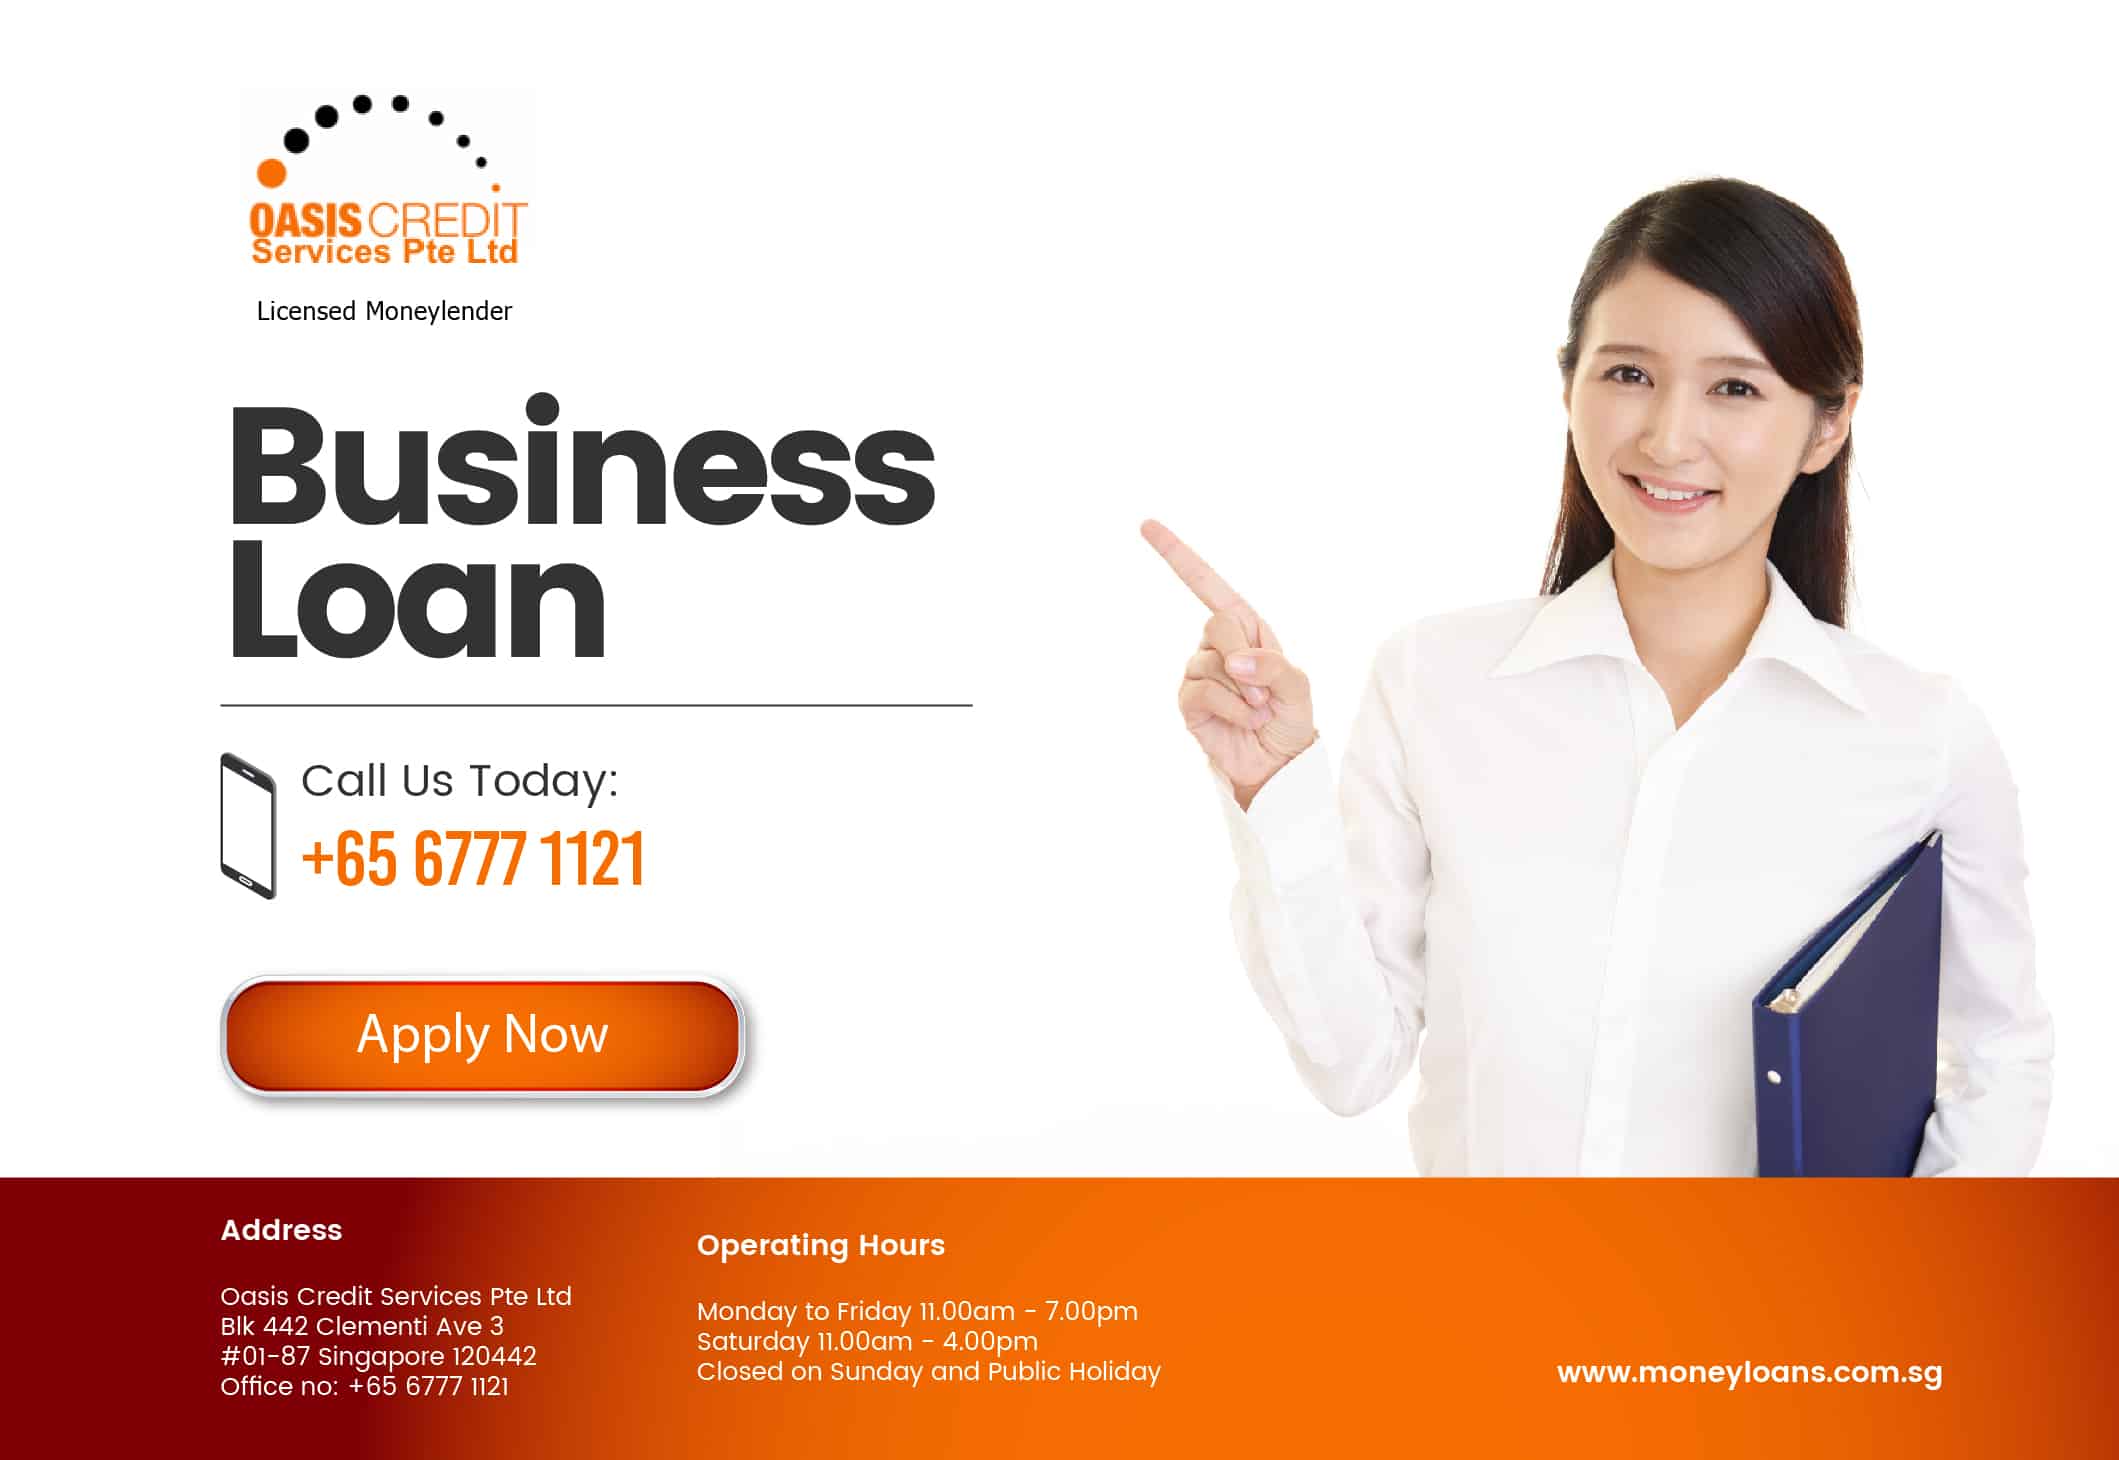 http://moneyloans.com.sg/business-loan-by-oasis-credit/